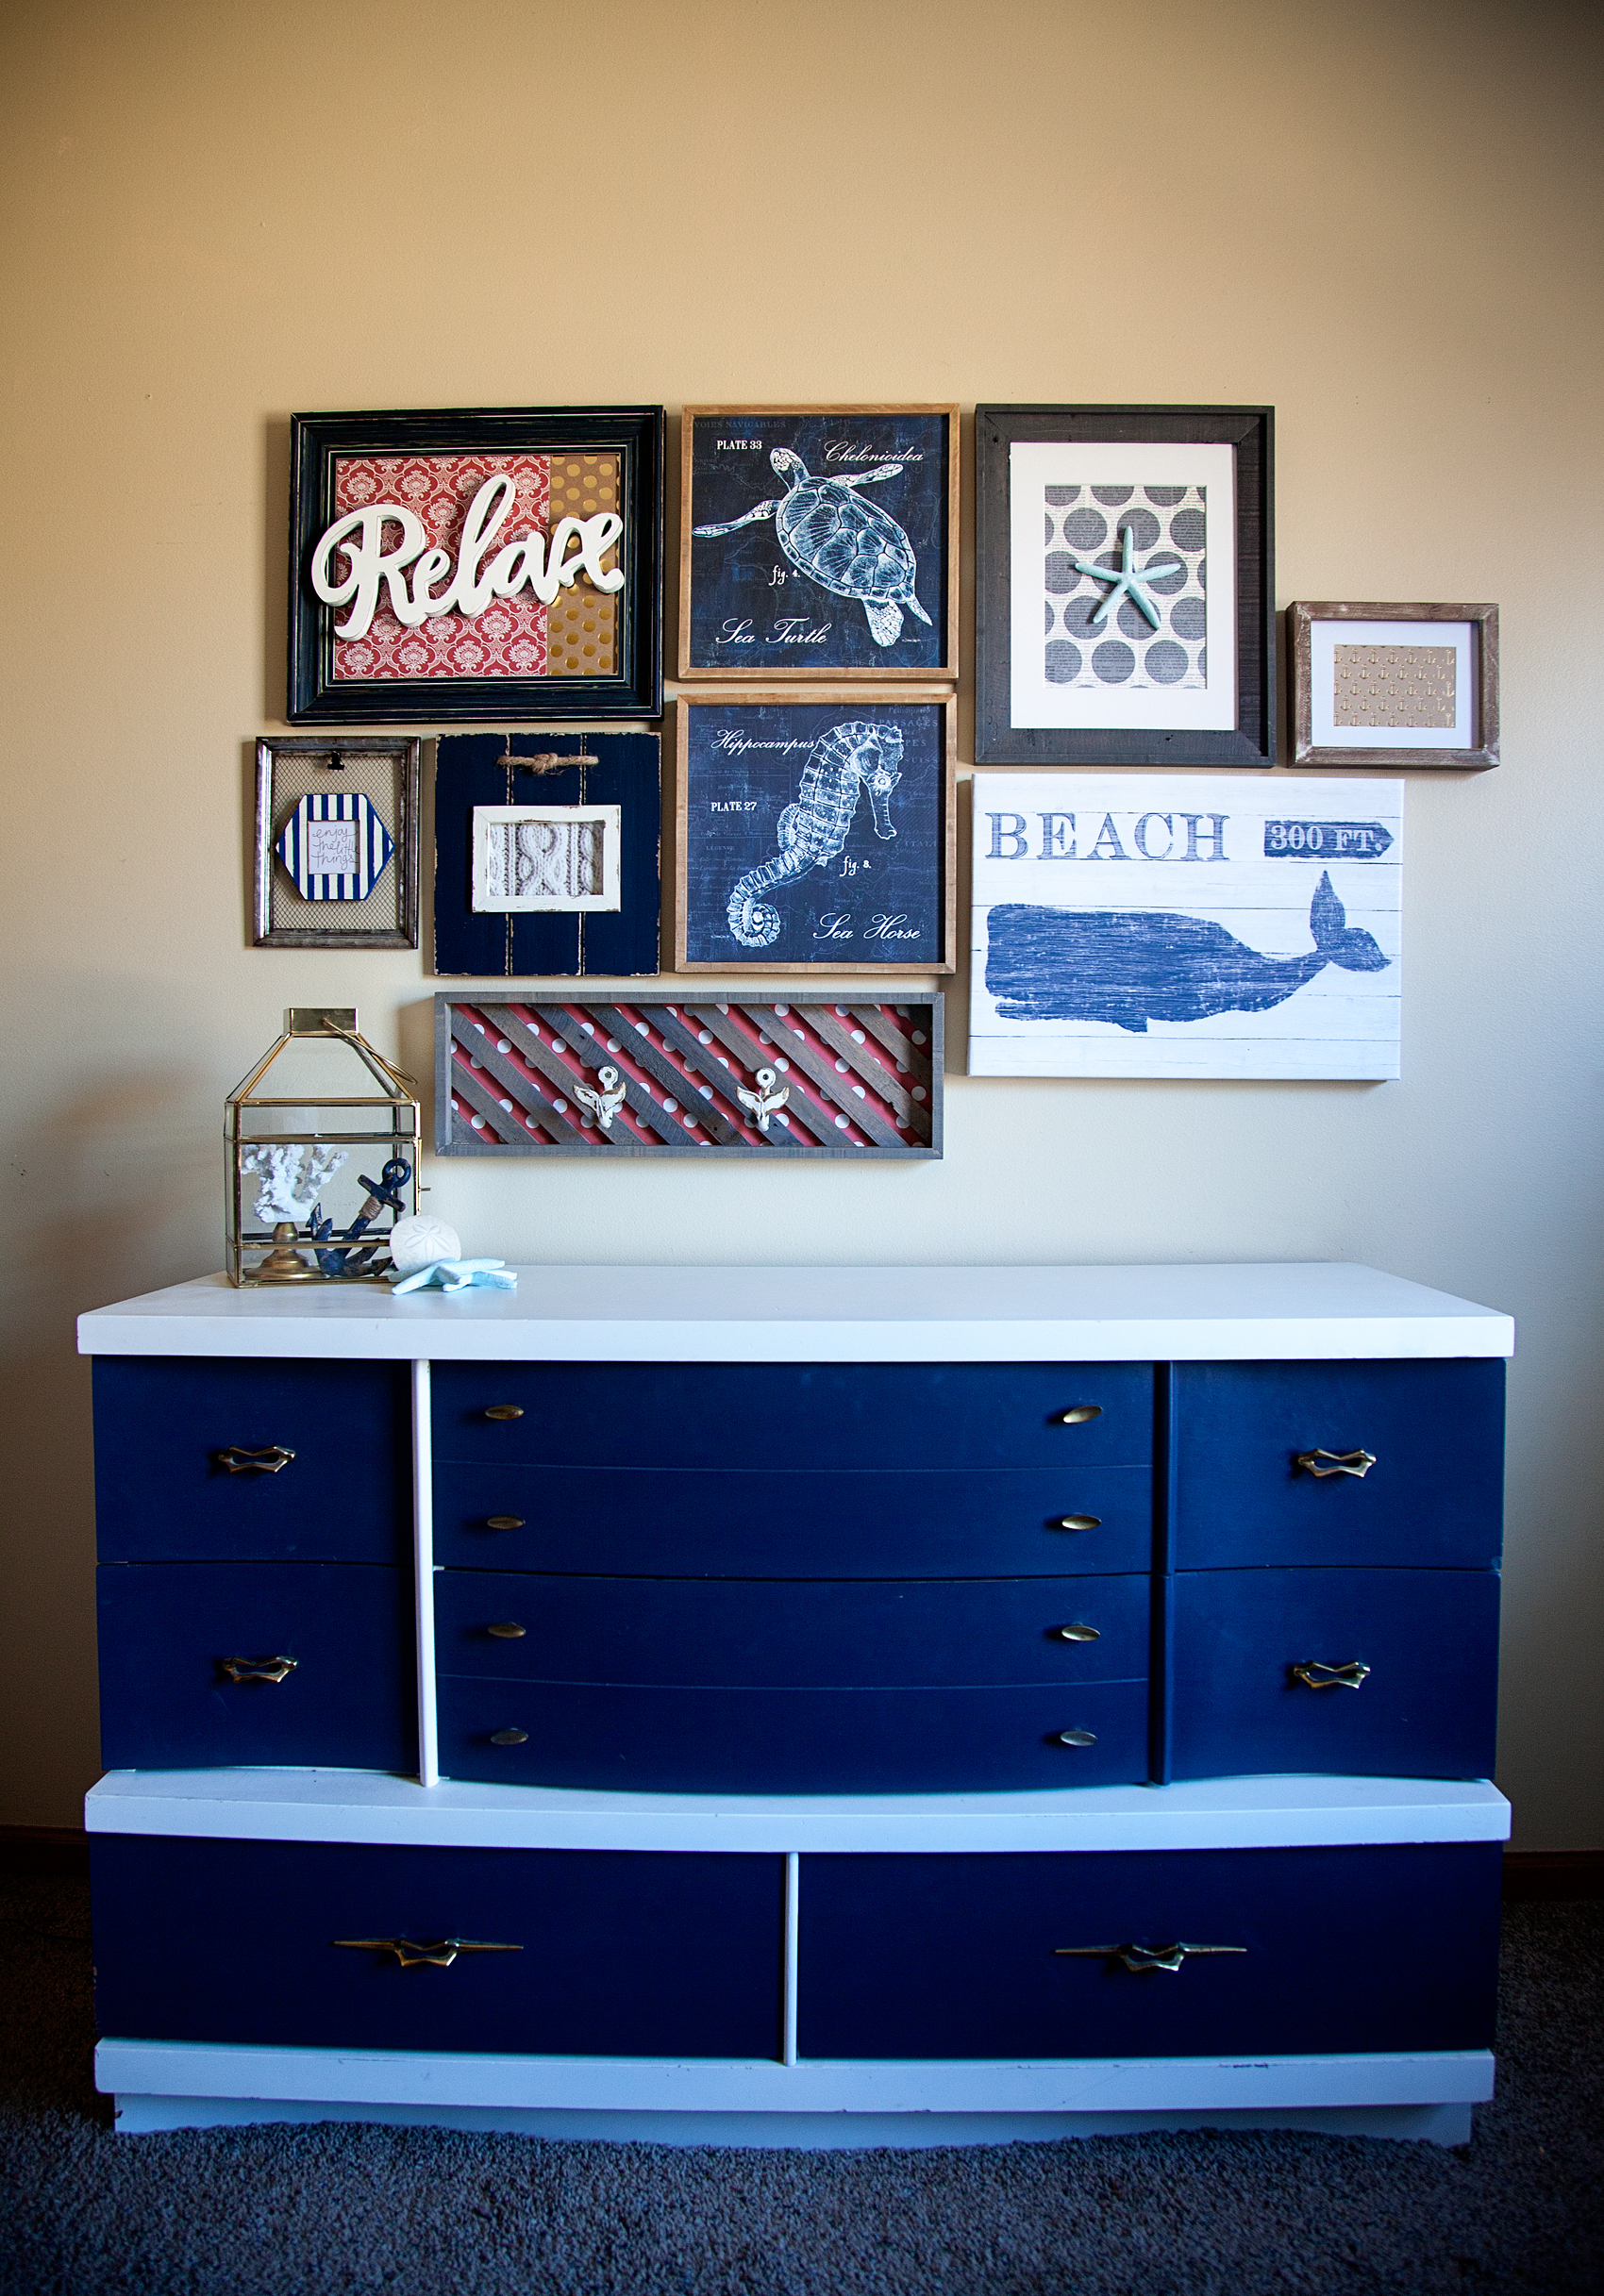 Tips and tricks for the perfect gallery wall